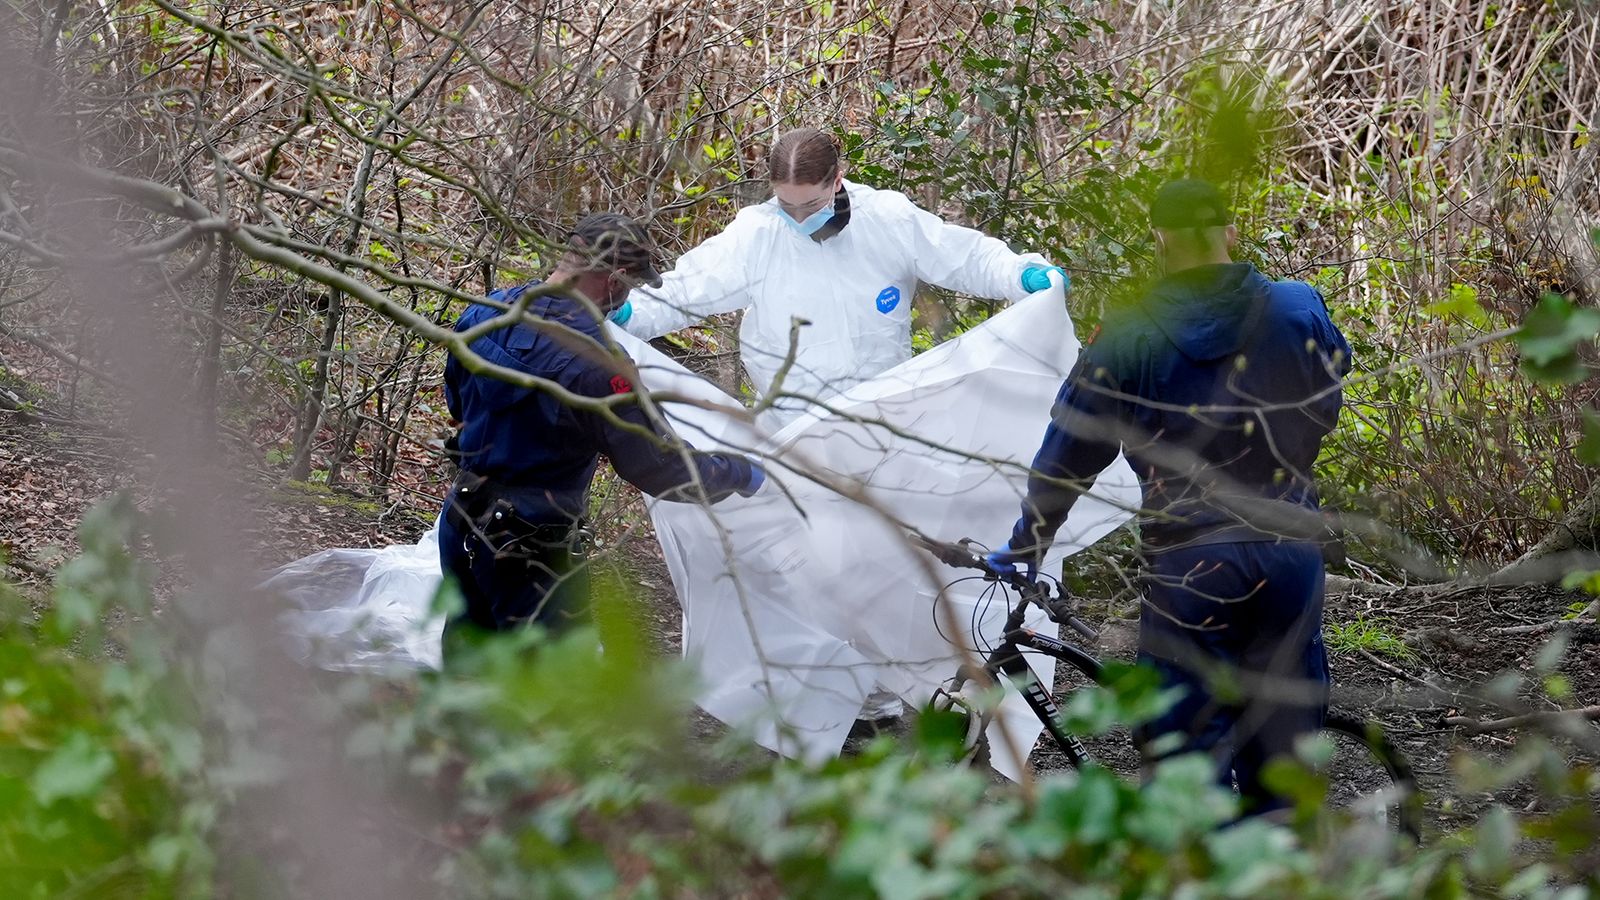 Human torso wrapped in plastic found at nature reserve belongs to man, police say